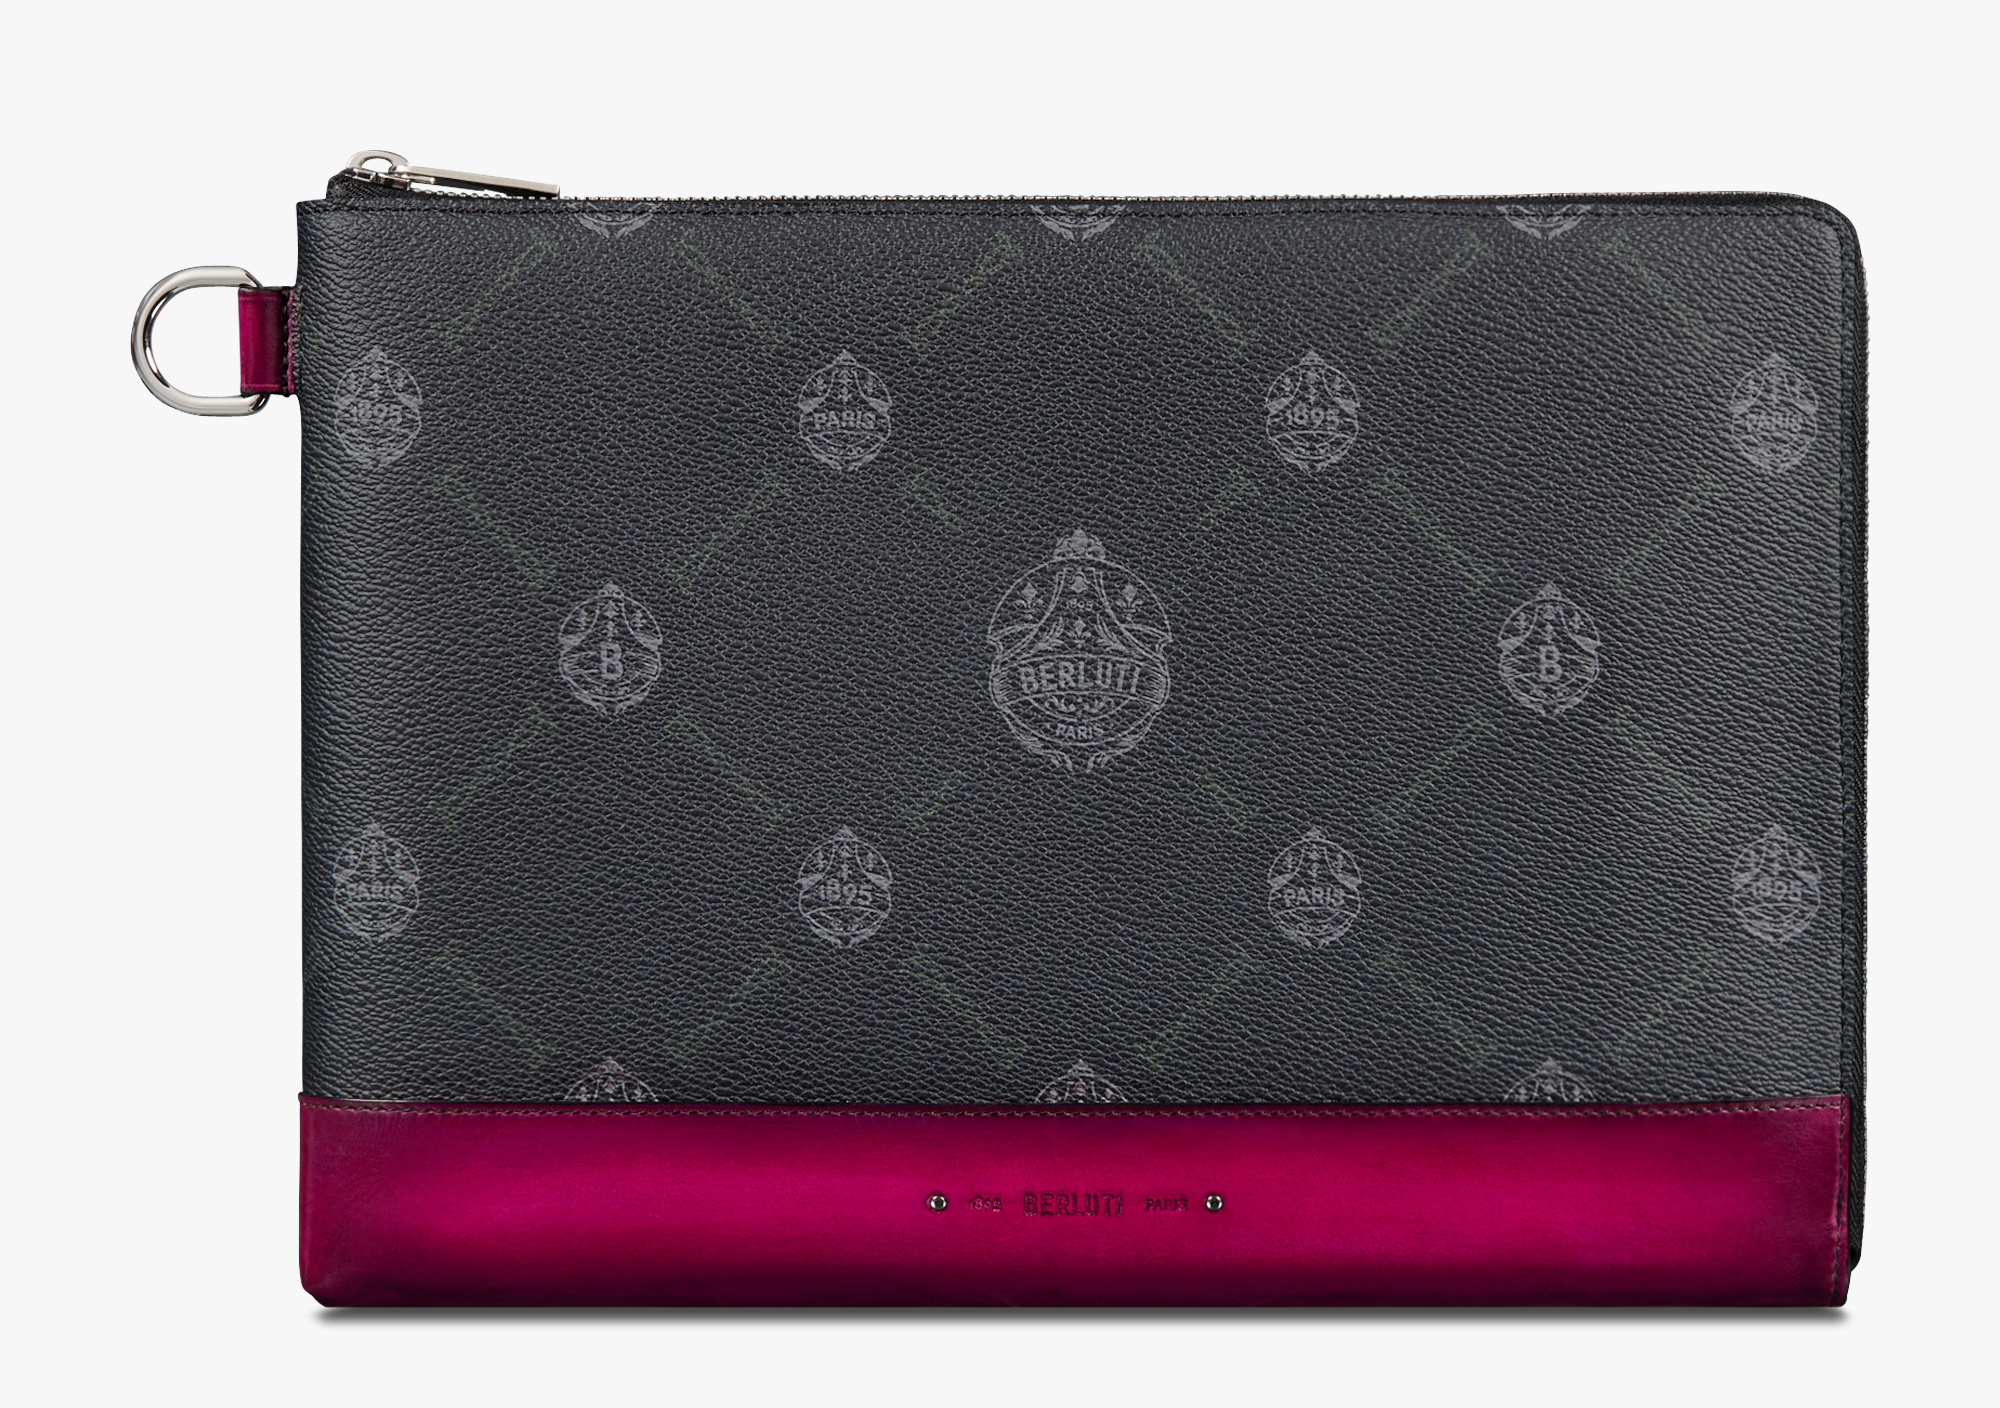 Nino GM Canvas and Leather Clutch, BLACK + ROSE GARDEN PINK, hi-res